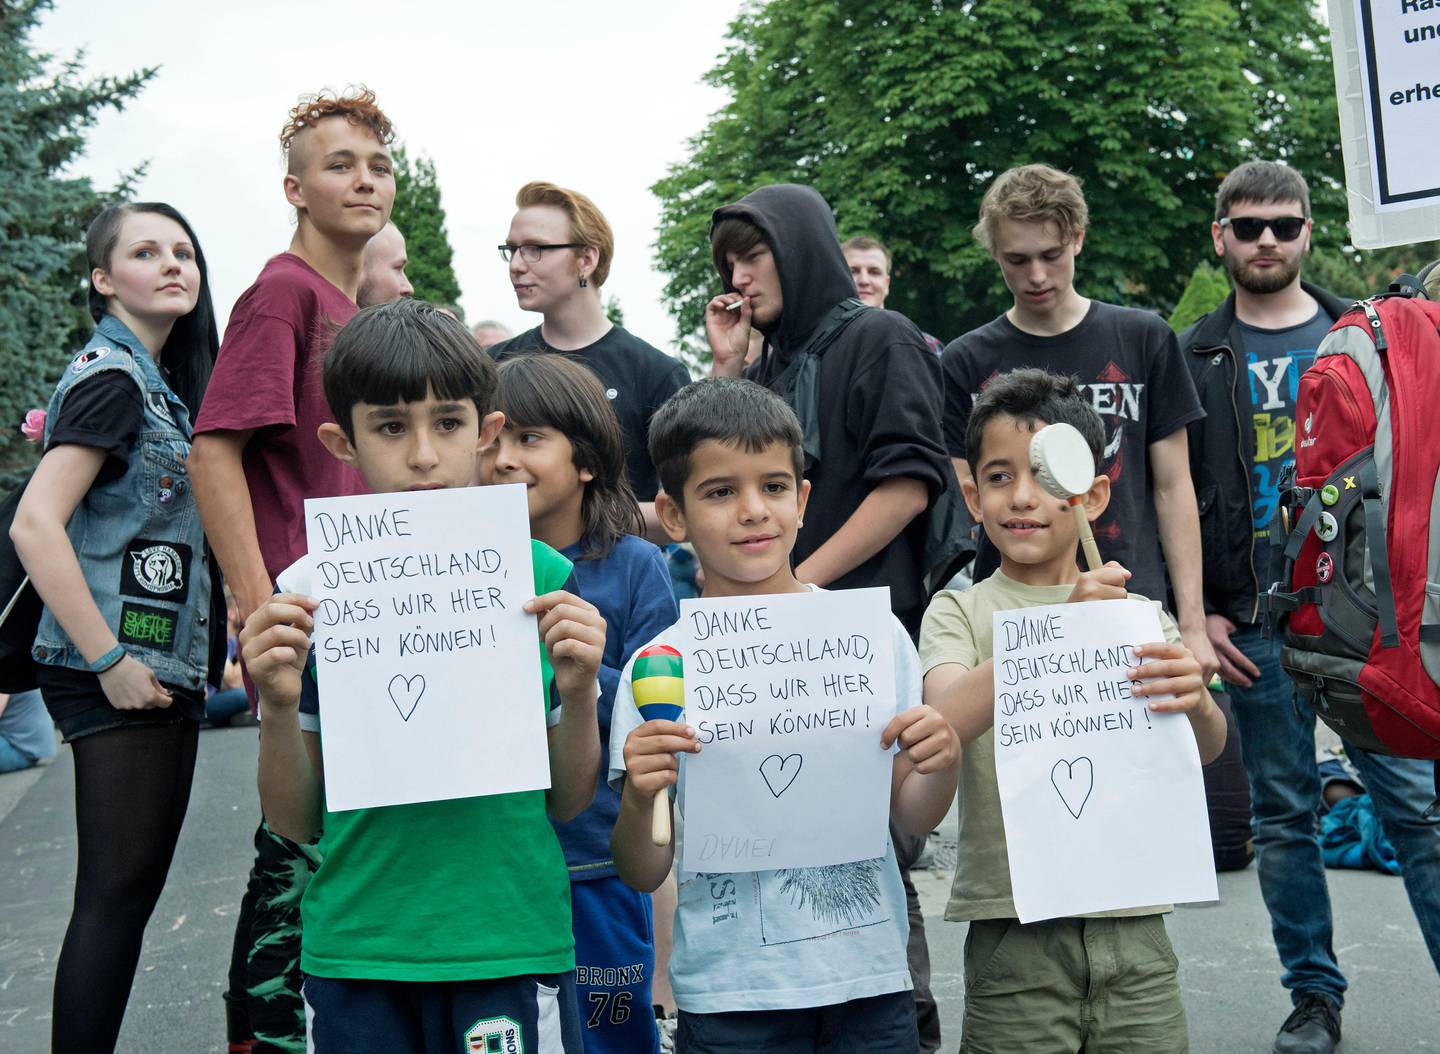 Children of refugees hold pieces of paper in front of the accommodation for immigrants in Freital near Dresden, eastern Germany, Friday, June 26, 2015. The words read: 'Thank you Germany to be here'. Members of Pegida, the right-wing movement that staged regular rallies in Dresden and elsewhere against immigrants and Muslims, helped initiate protests and demonstrated against the arrival of the first refugee families. (AP Photo/Jens Meyer)